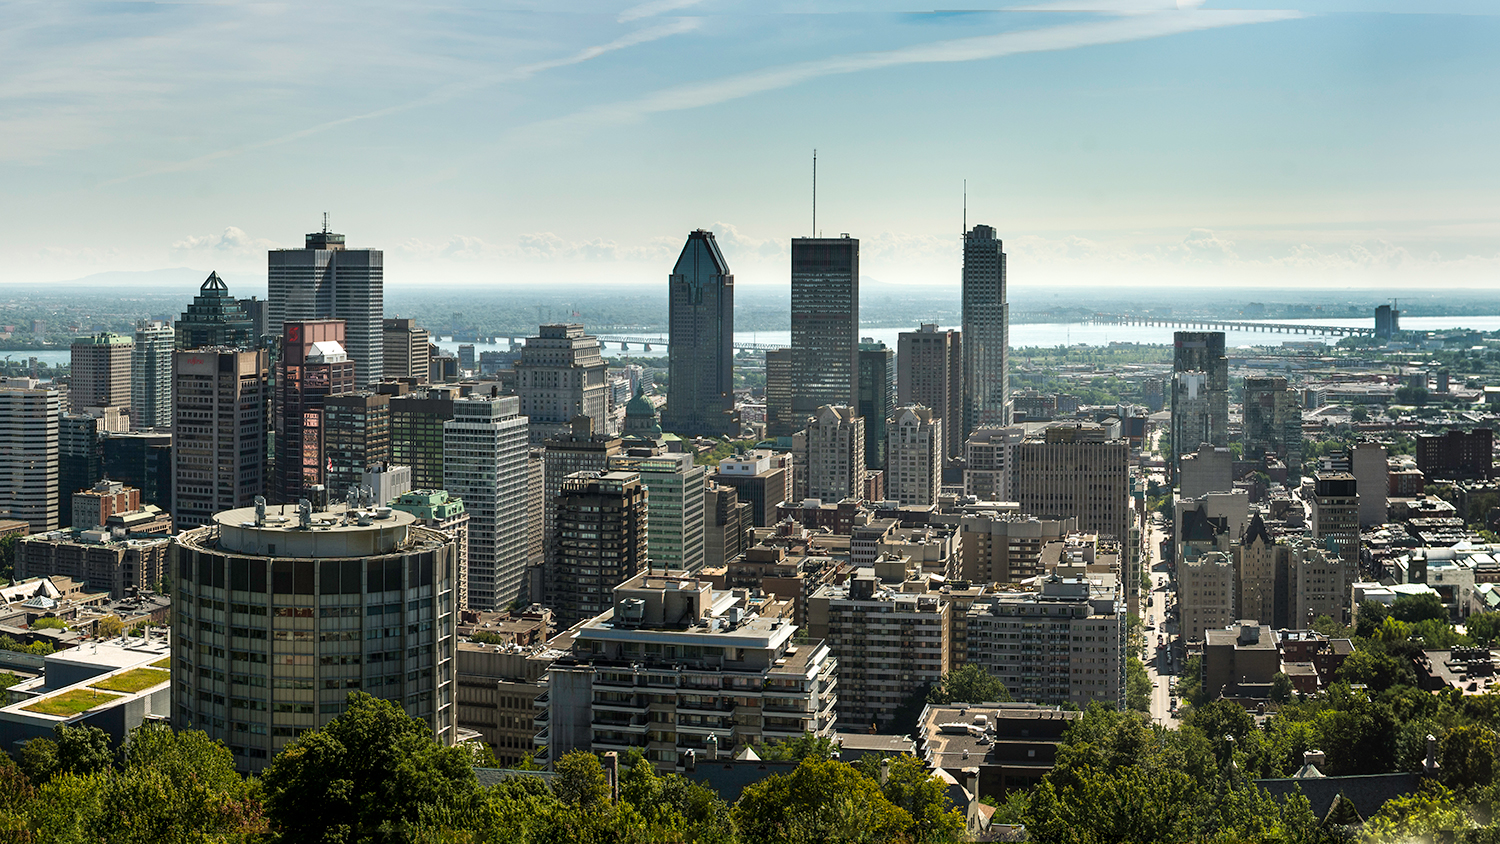 Skyline of Montréal from the Mount Royal Park